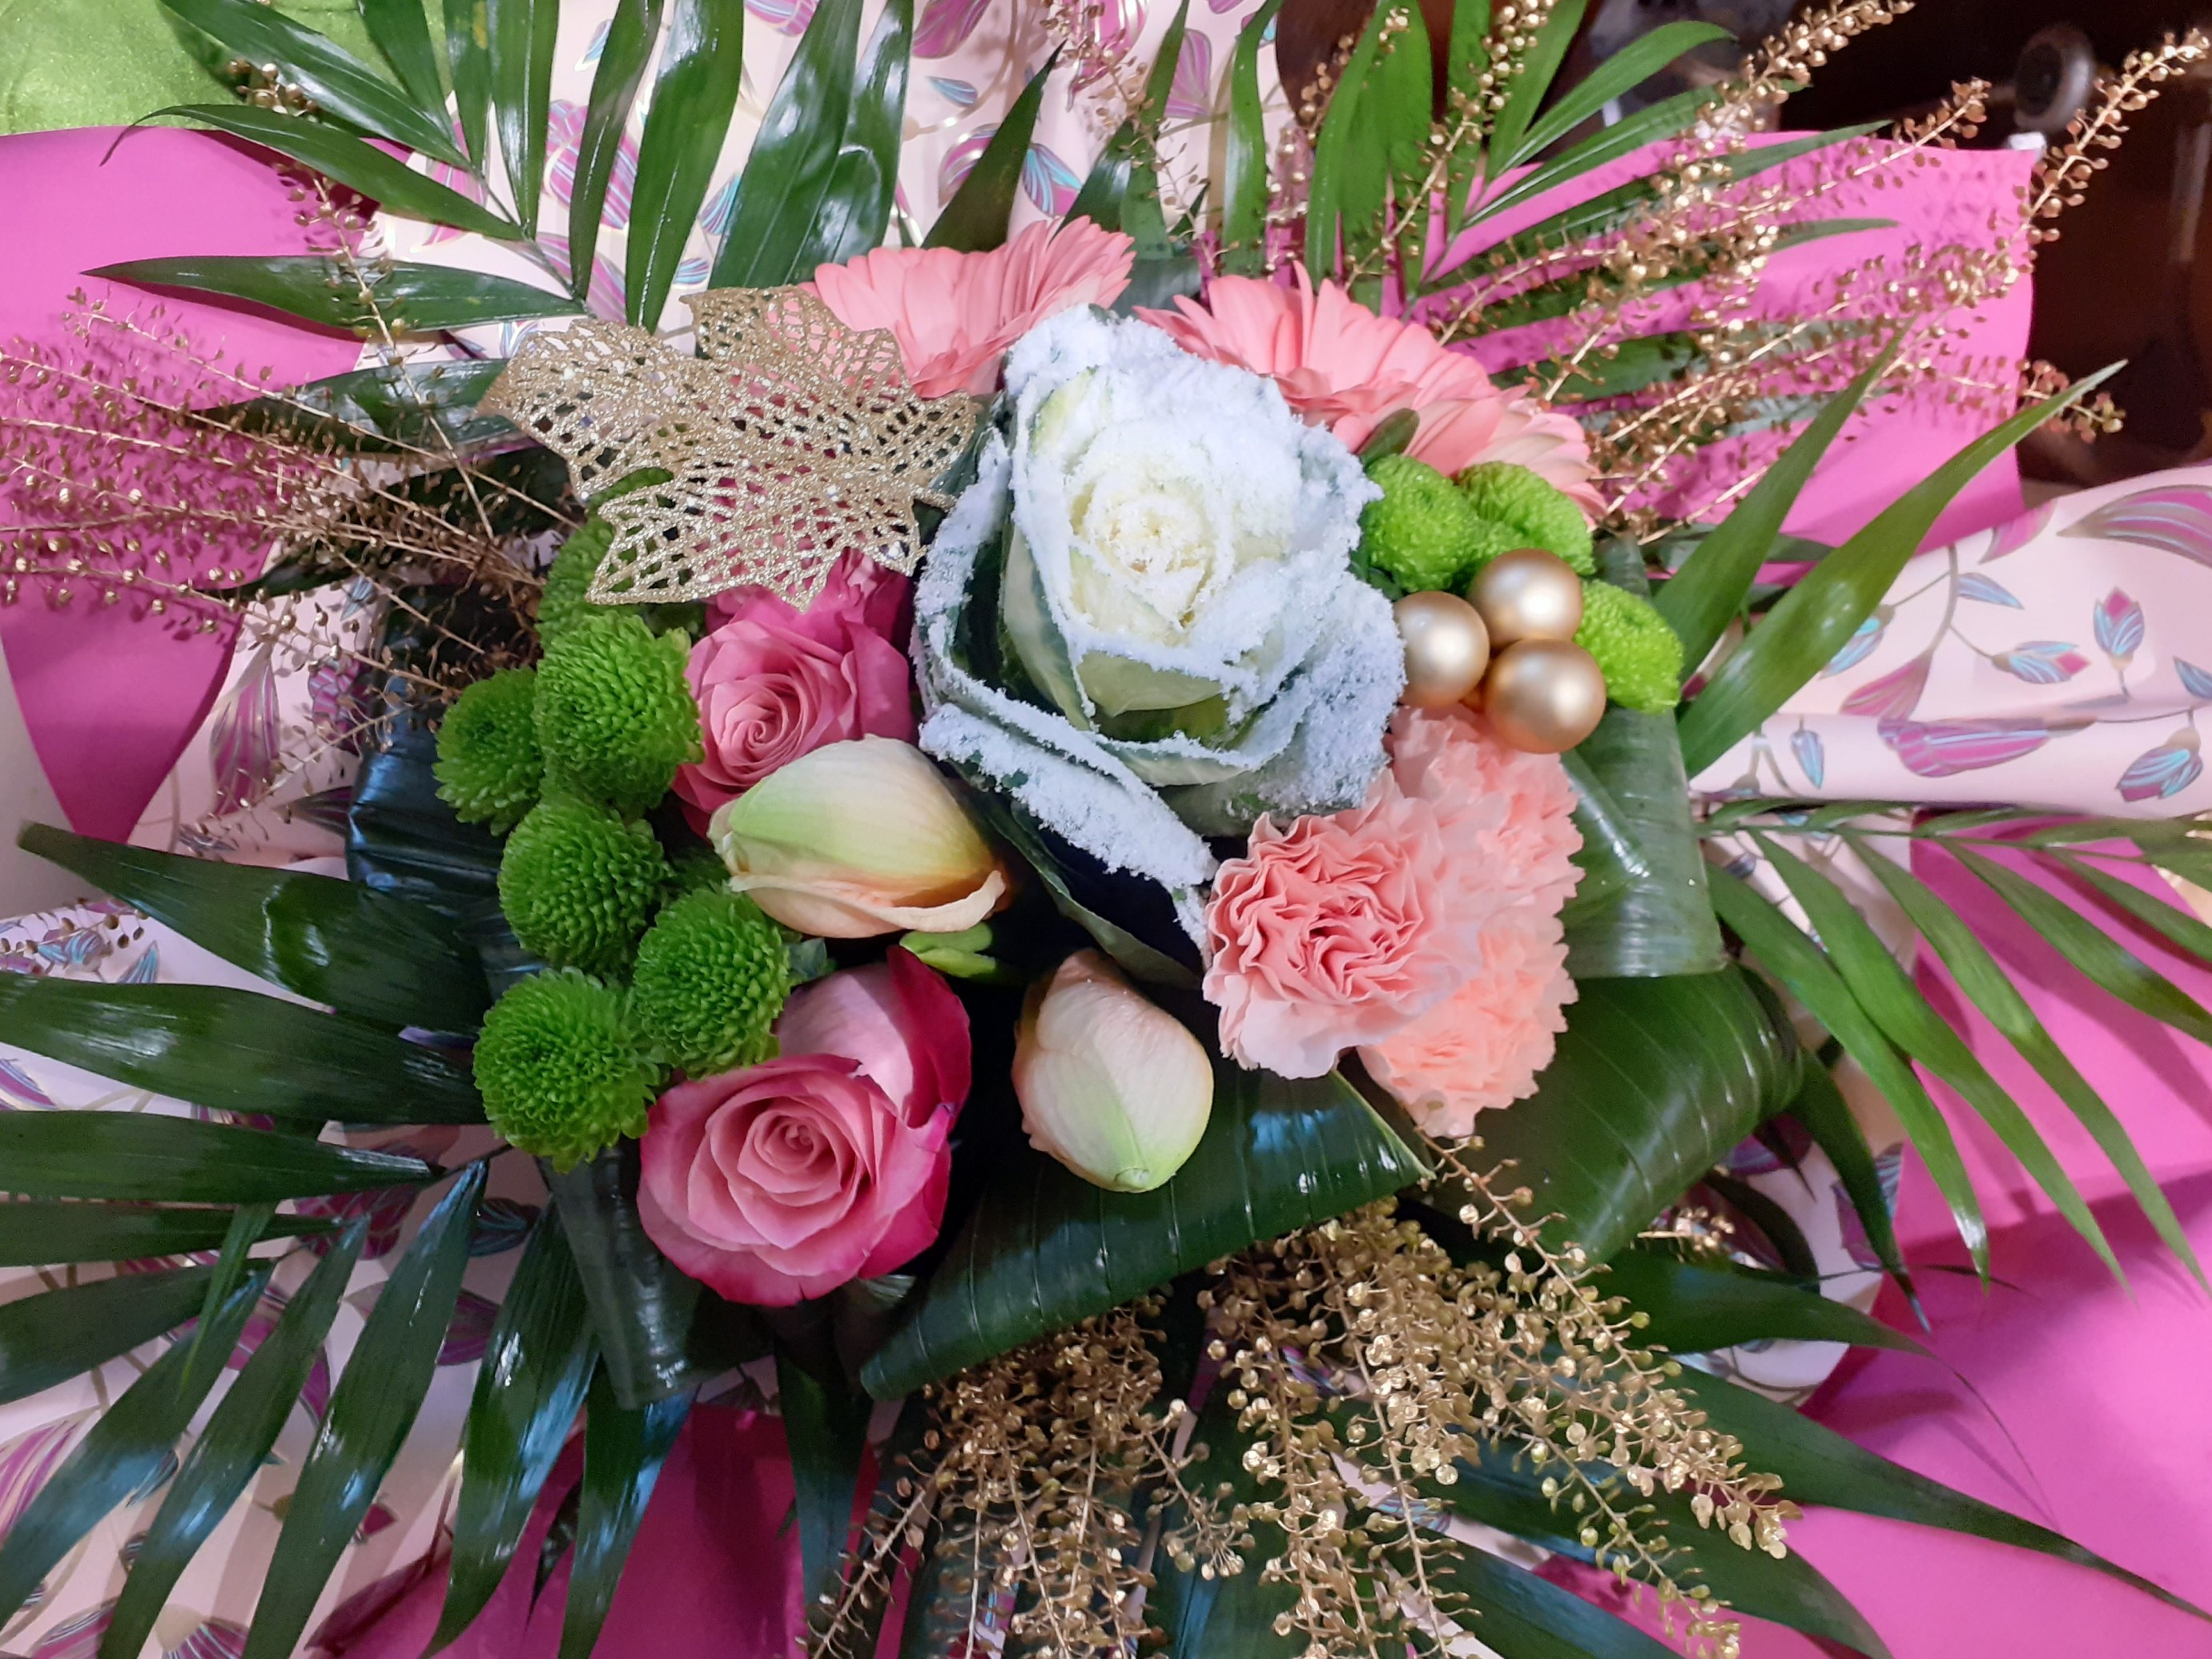 Bouquet rond tons roses